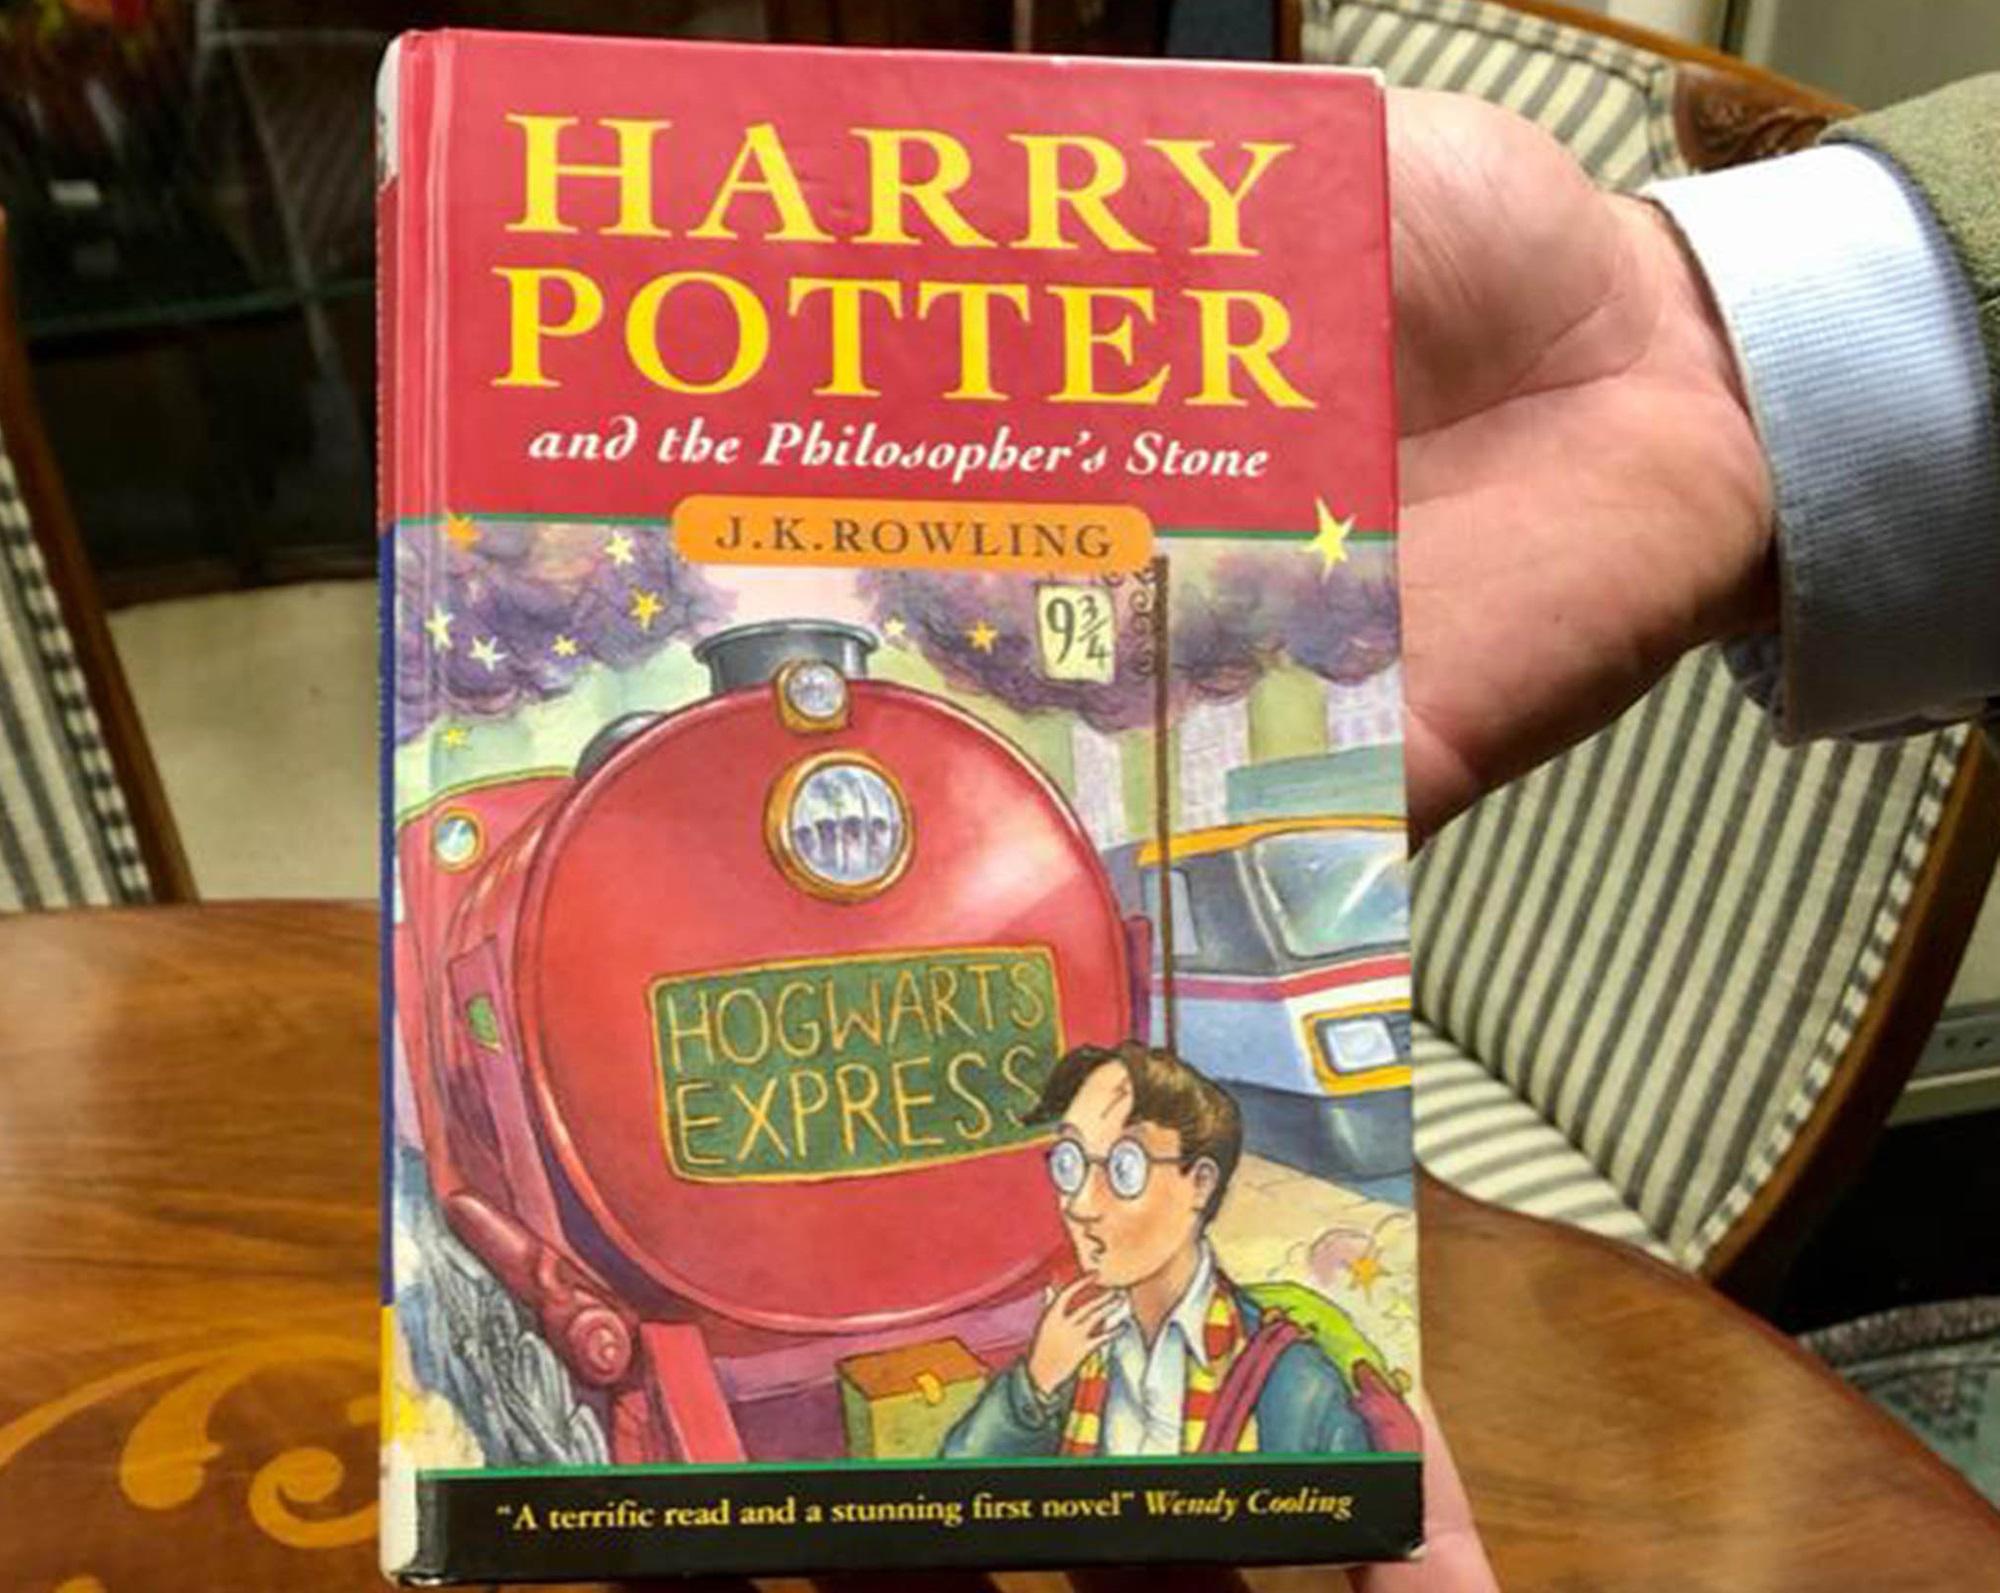 Record-breaking Harry Potter cover, million-selling auction for the illustration